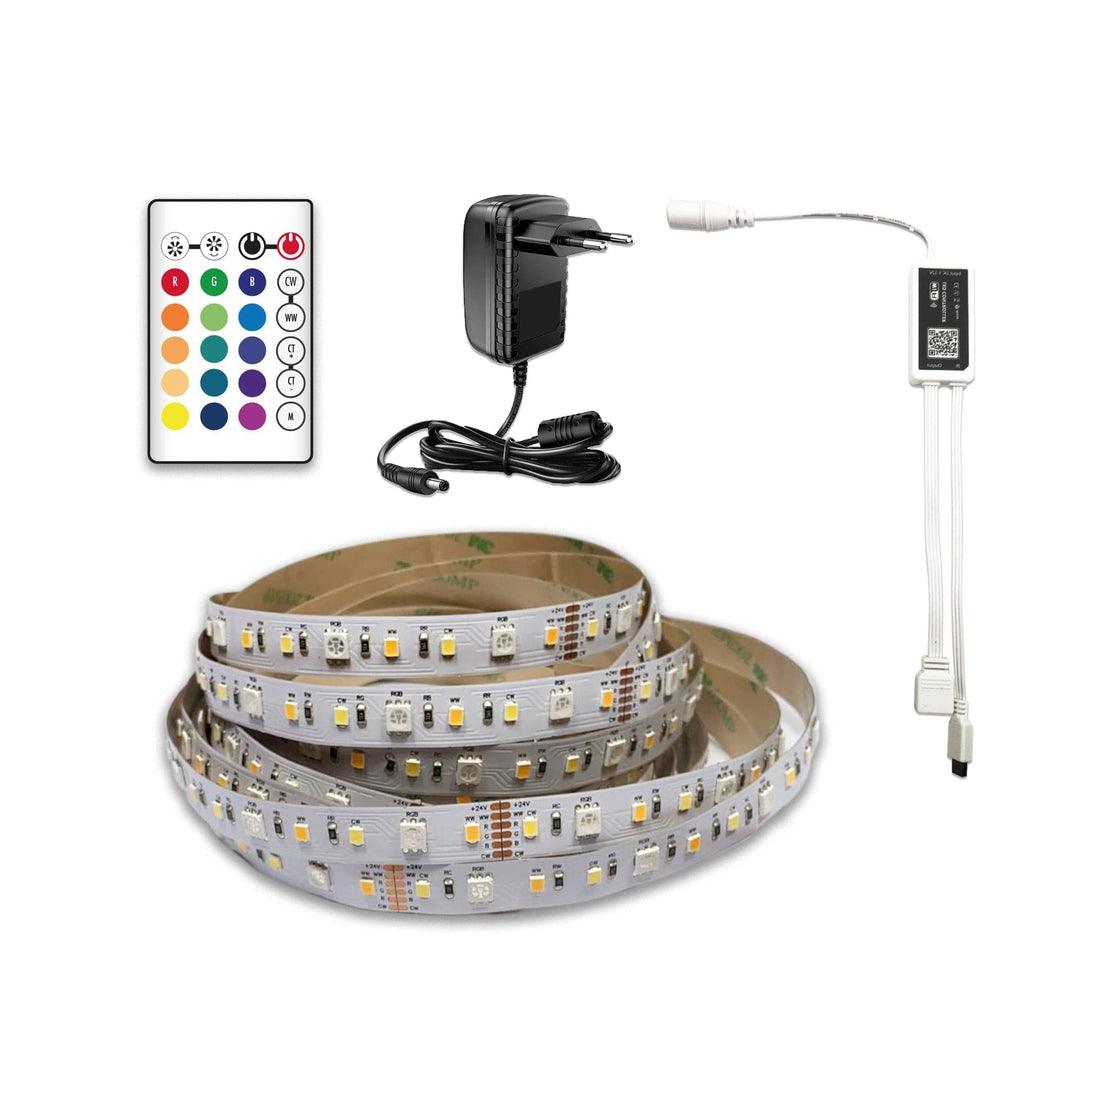 LED STRIP KIT 5MT 24W RGB CCT WITH WI-FI CONTROLLER AND WITH REMOTE CONTROL IP65 - best price from Maltashopper.com BR420005774